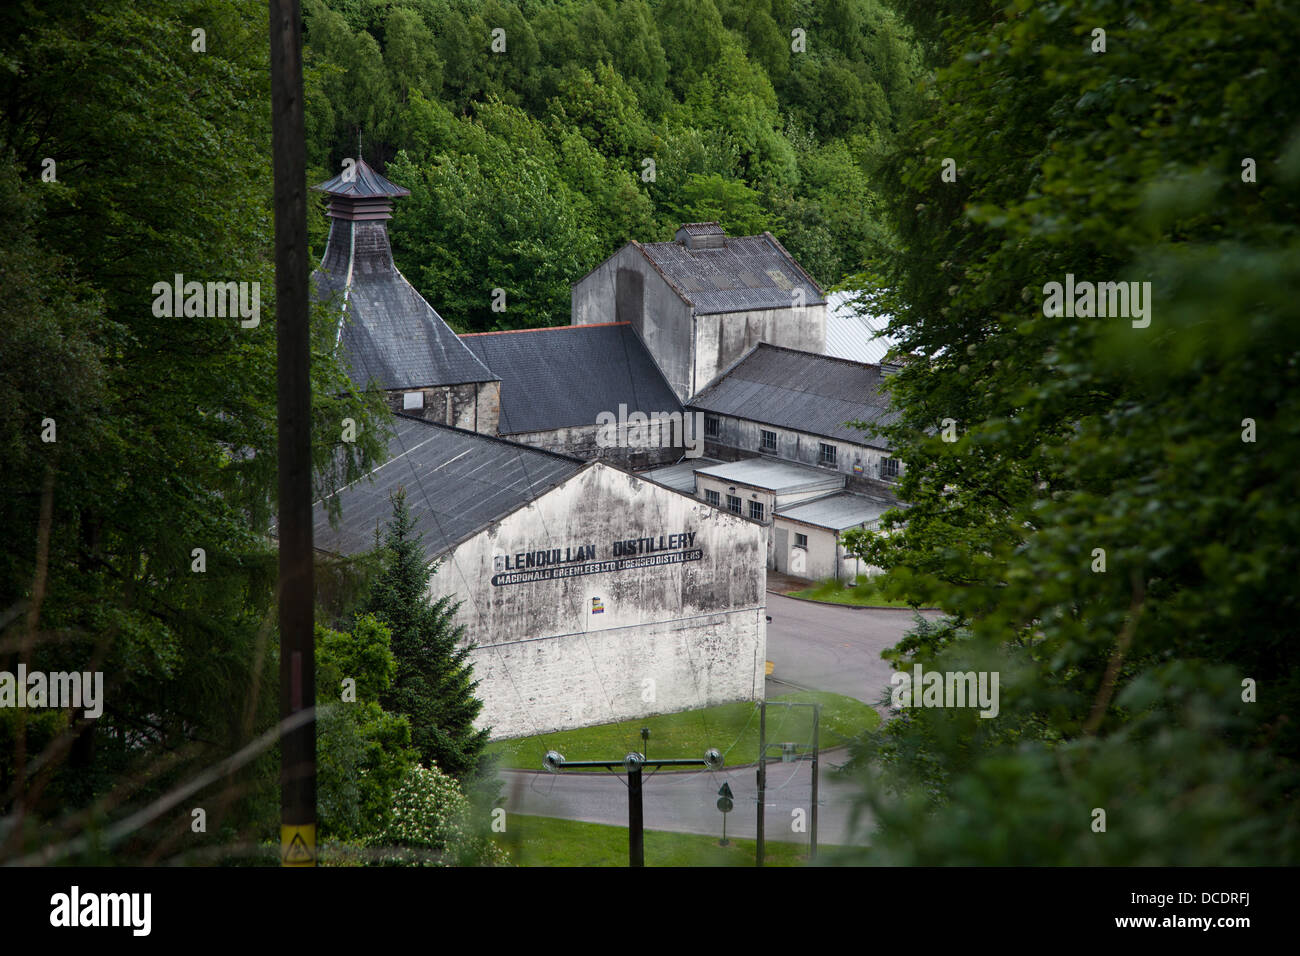 The distillery Glendullan lies surrounded by trees and hills in Dufftown in the Scottish Highlands. Stock Photo